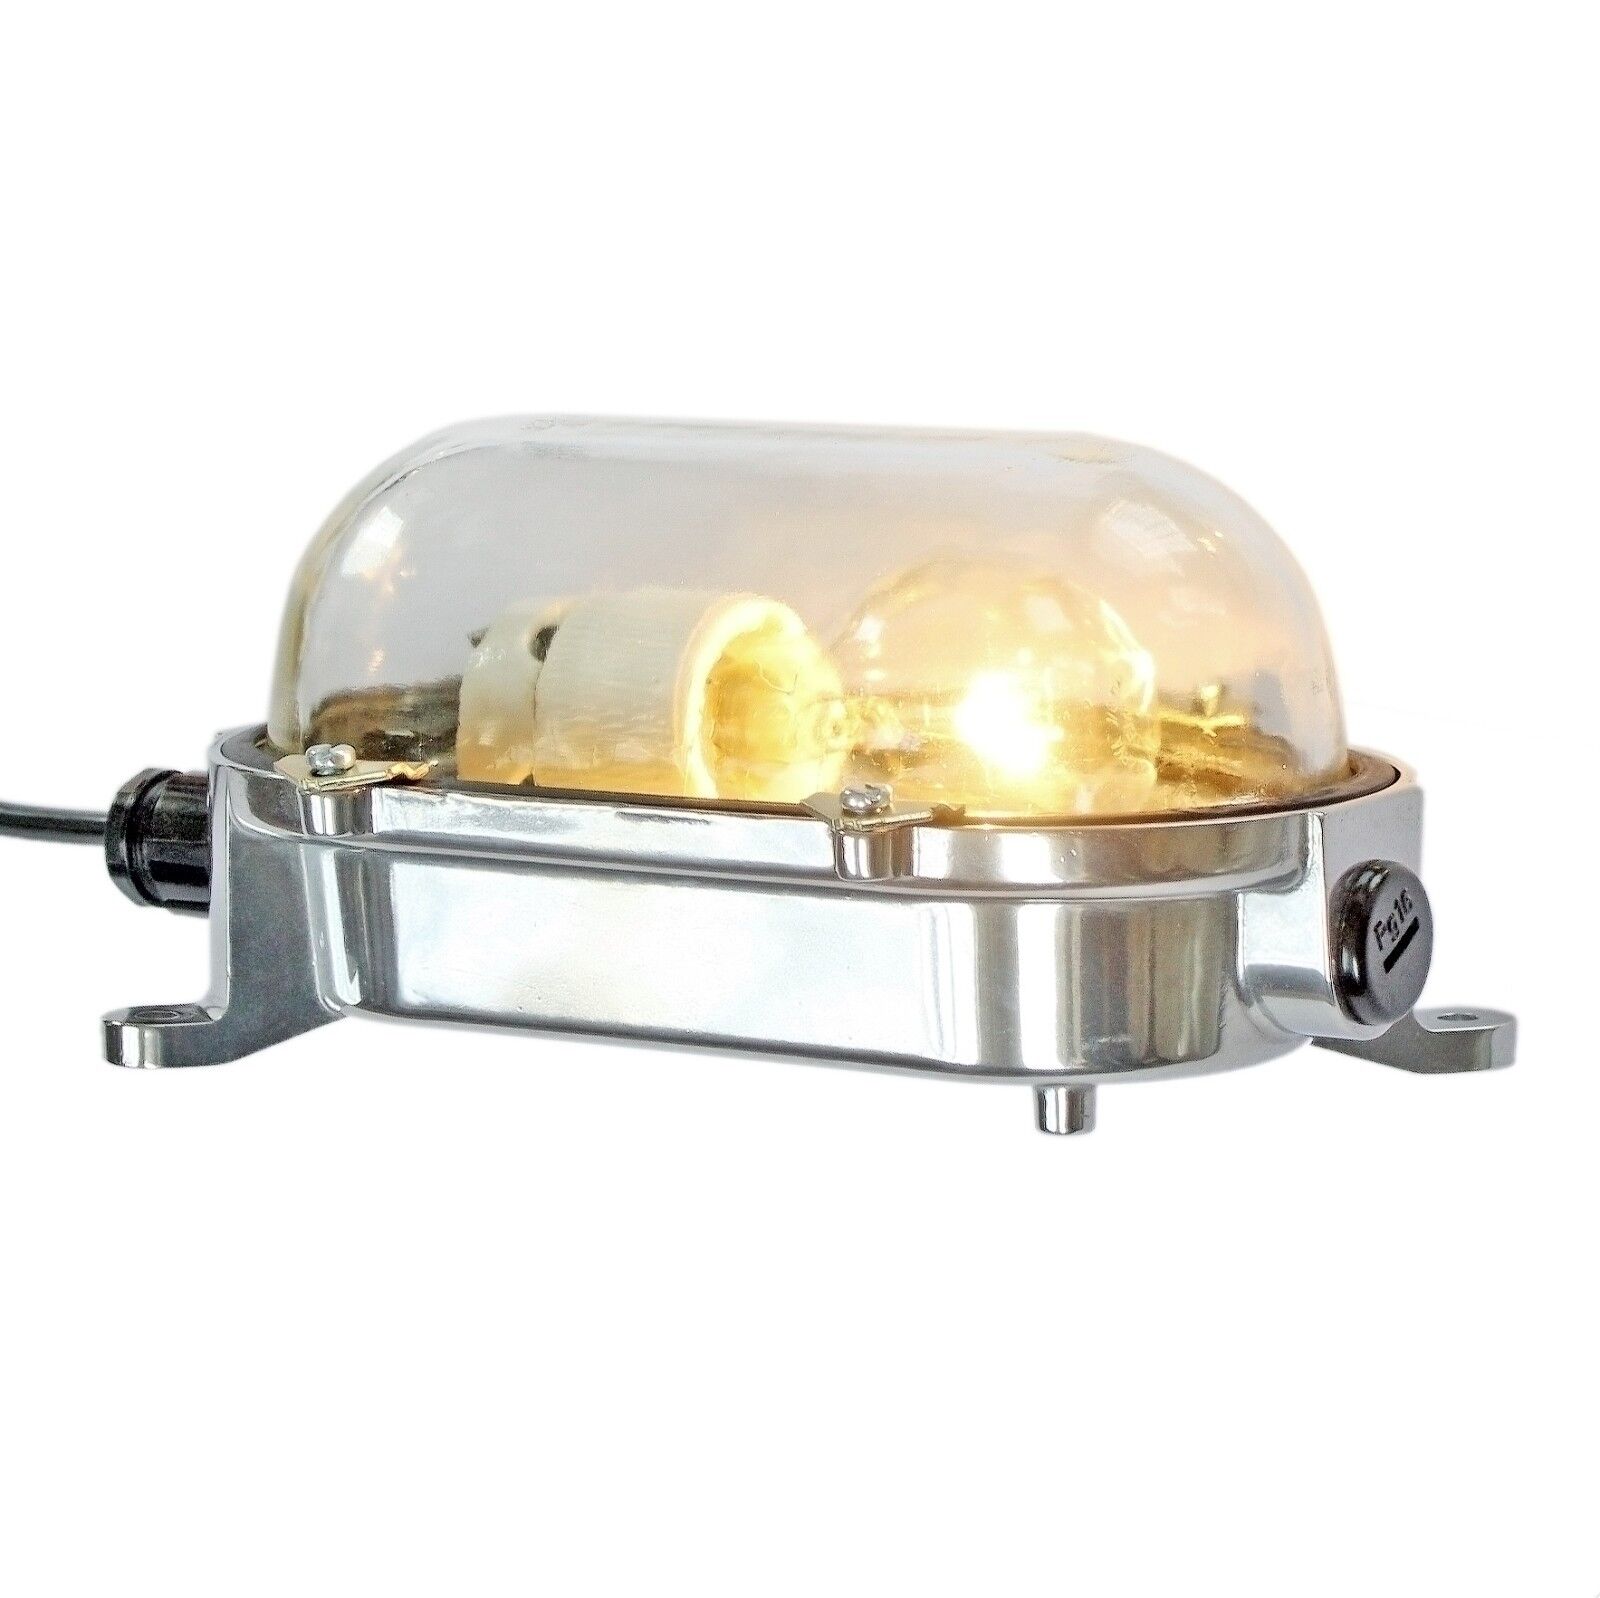 Factory Lamp Ship Lamp Aluminium Polished Bunker Lamp Industry Vintage Wall Oval